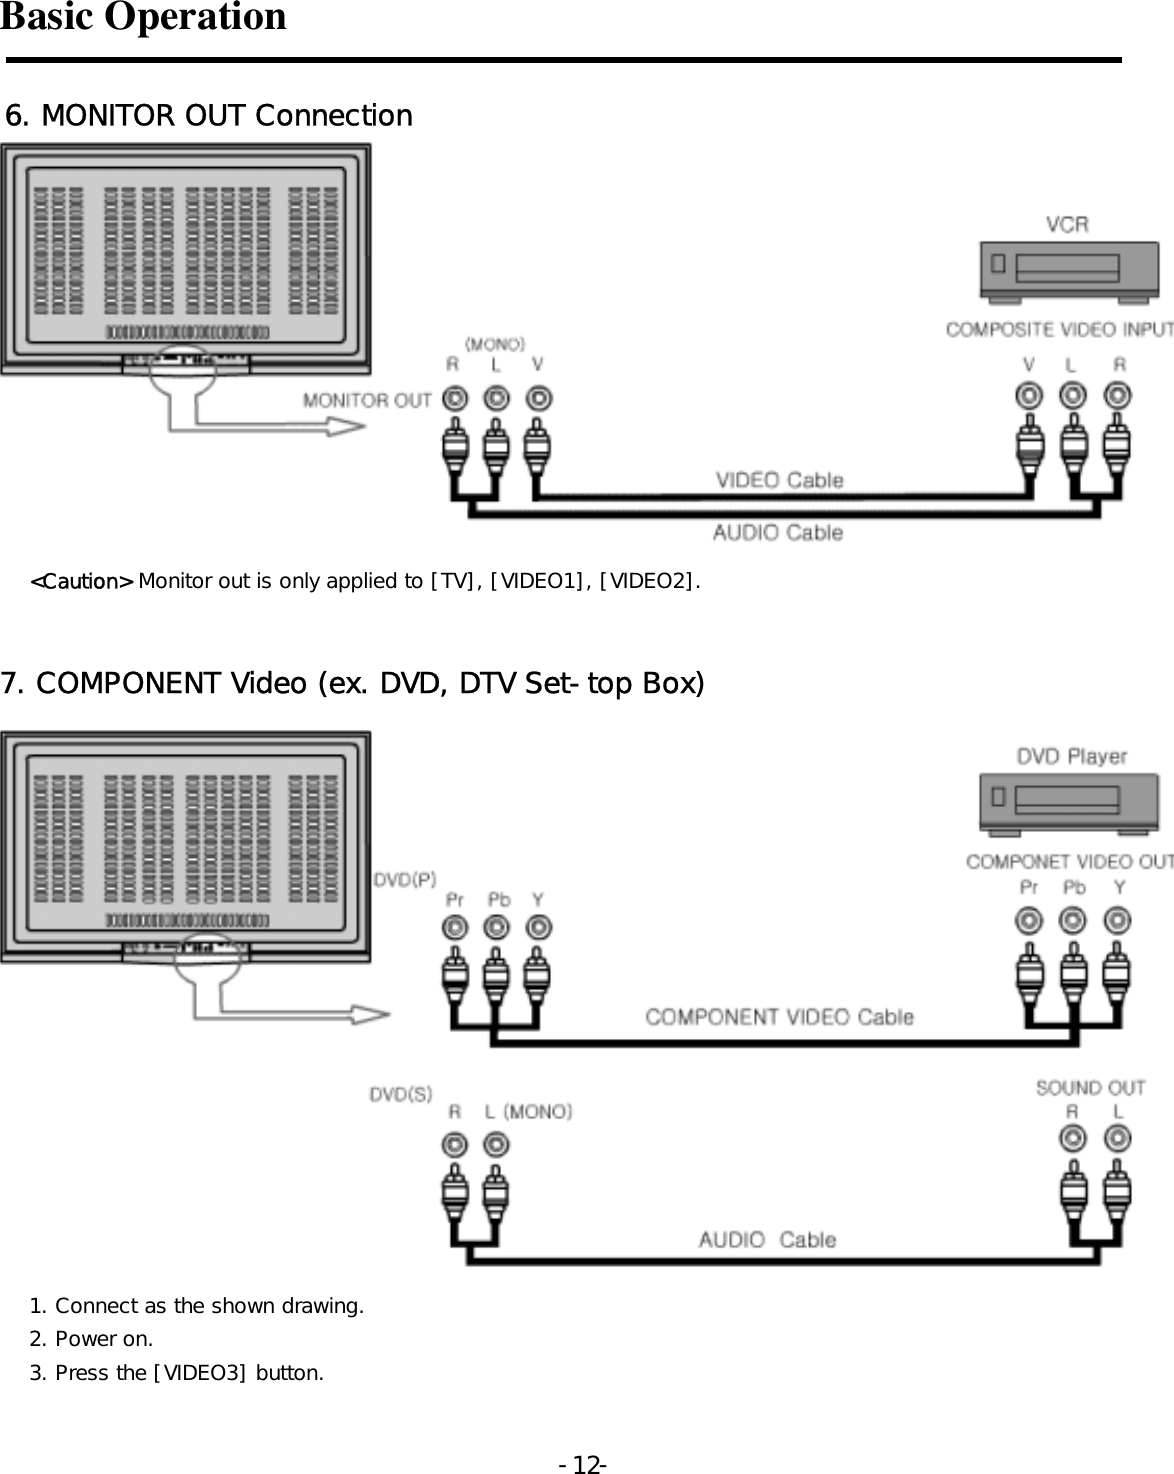 Basic Operation  6. MONITOR OUT Connection   &lt;Caution&gt; Monitor out is only applied to [TV], [VIDEO1], [VIDEO2].   7. COMPONENT Video (ex. DVD, DTV Set-top Box)  1. Connect as the shown drawing. 2. Power on. 3. Press the [VIDEO3] button.   -  - 12